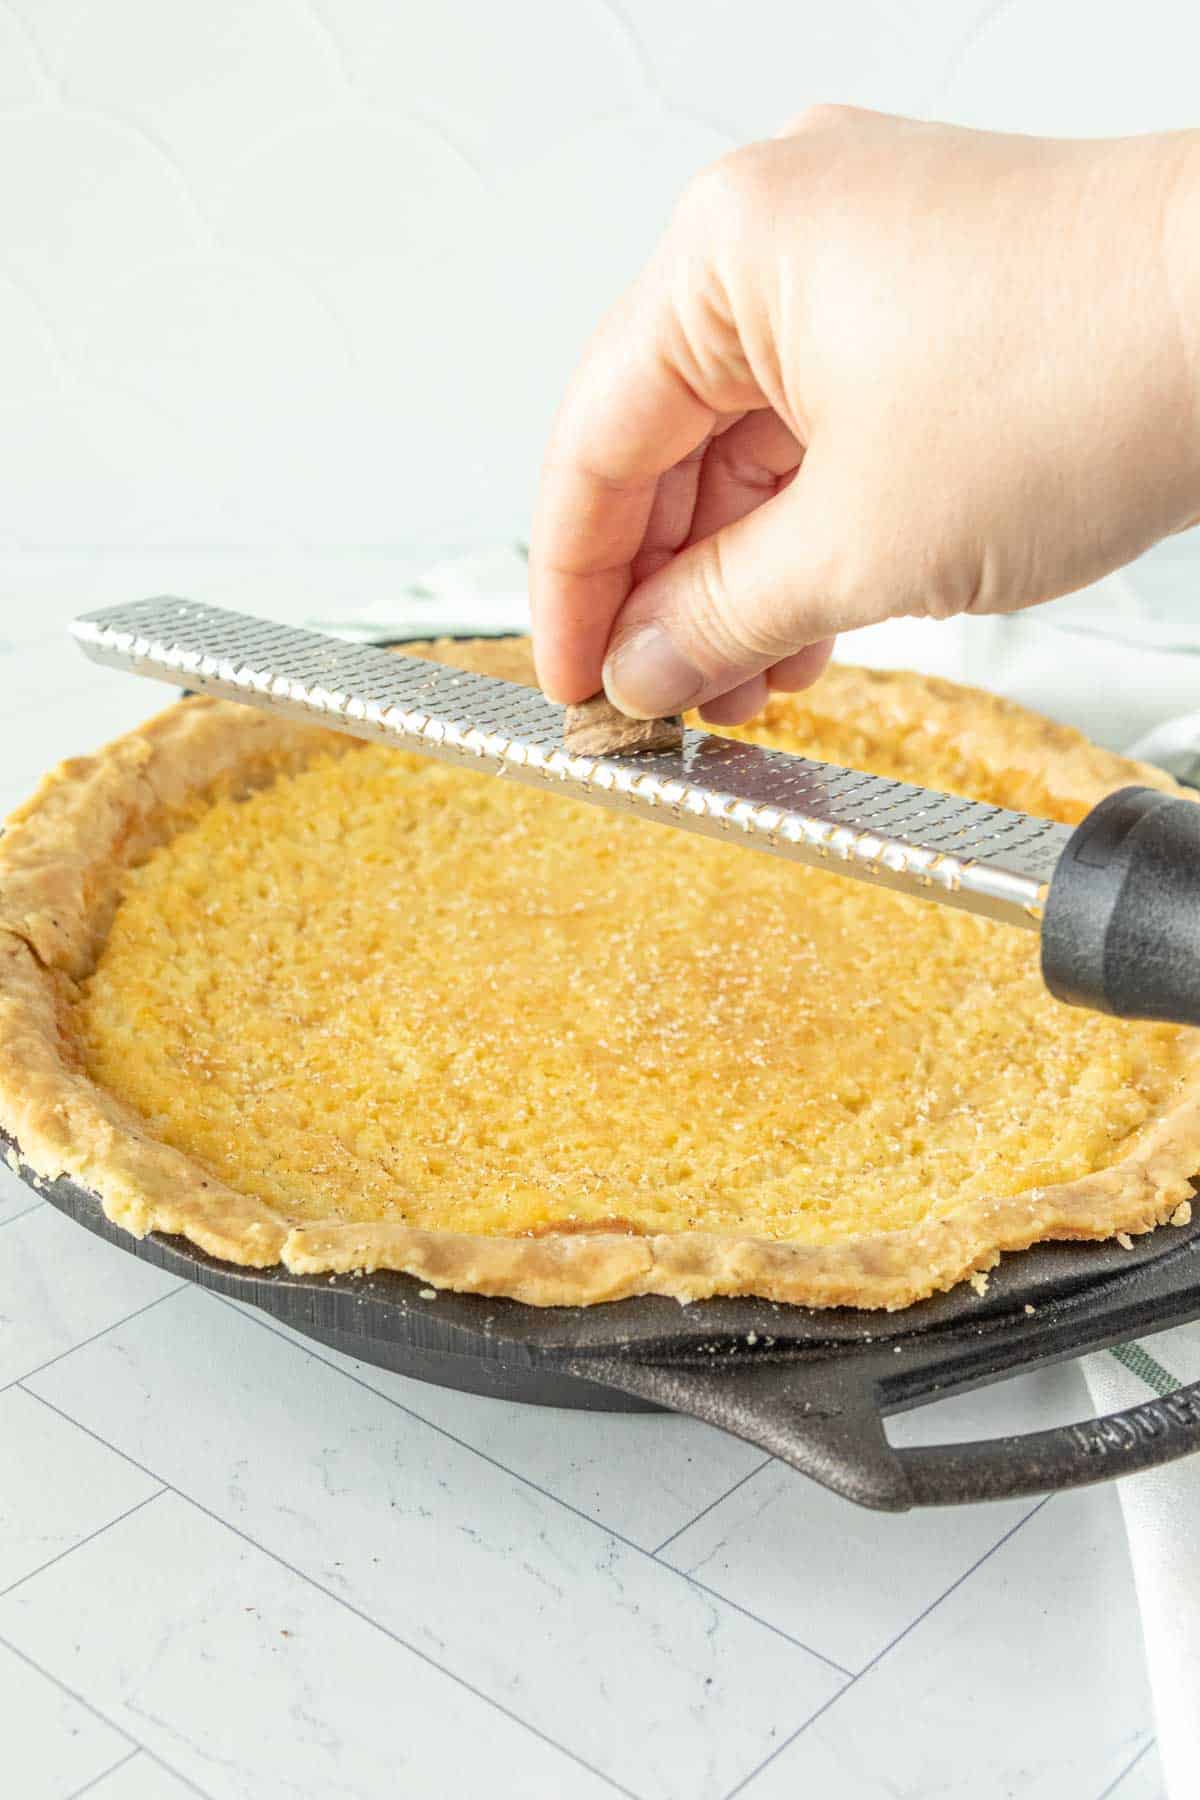 A person grating nutmeg over a pie in a cast iron skillet.